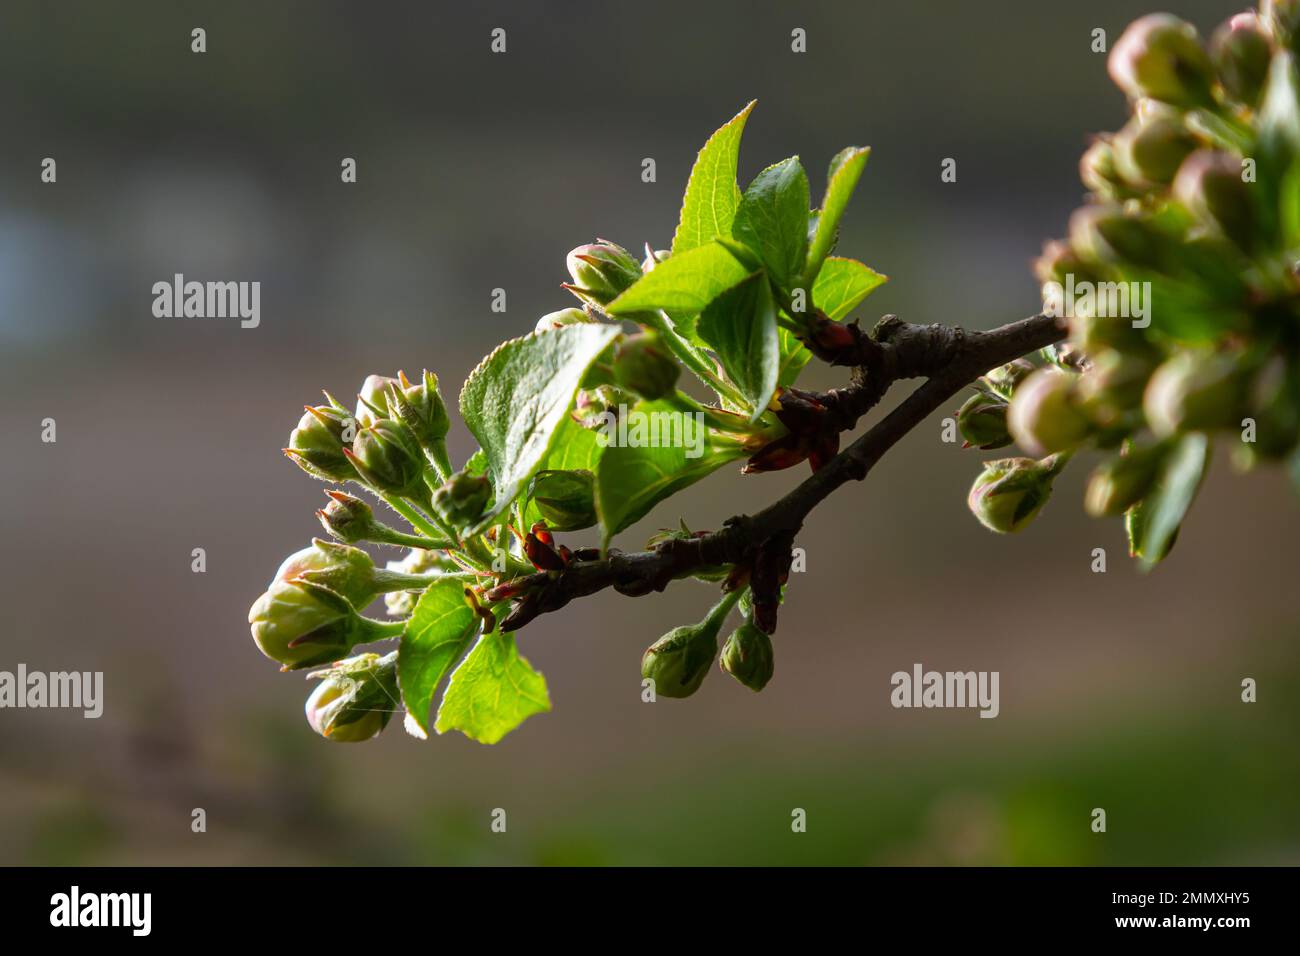 Fresh pink and white blossom flower buds of the Discovery Apple tree, Malus domestica, blooming in springtime. Stock Photo